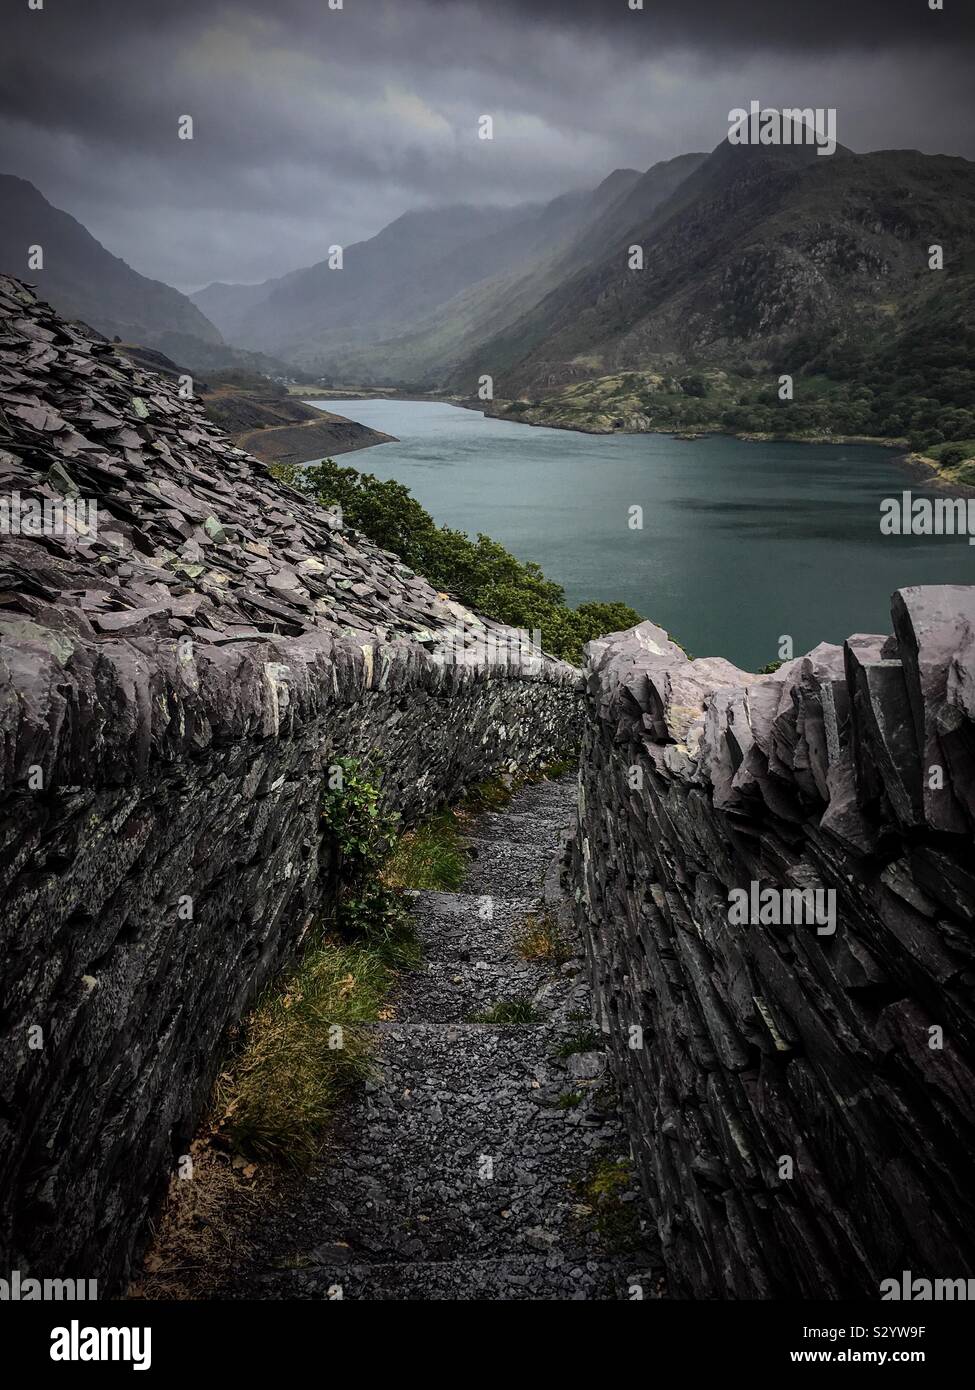 Dinorwic Quarry in moody stormy conditions overlooking Llyn Peris in Snowdonia National Park, Wales, UK Stock Photo